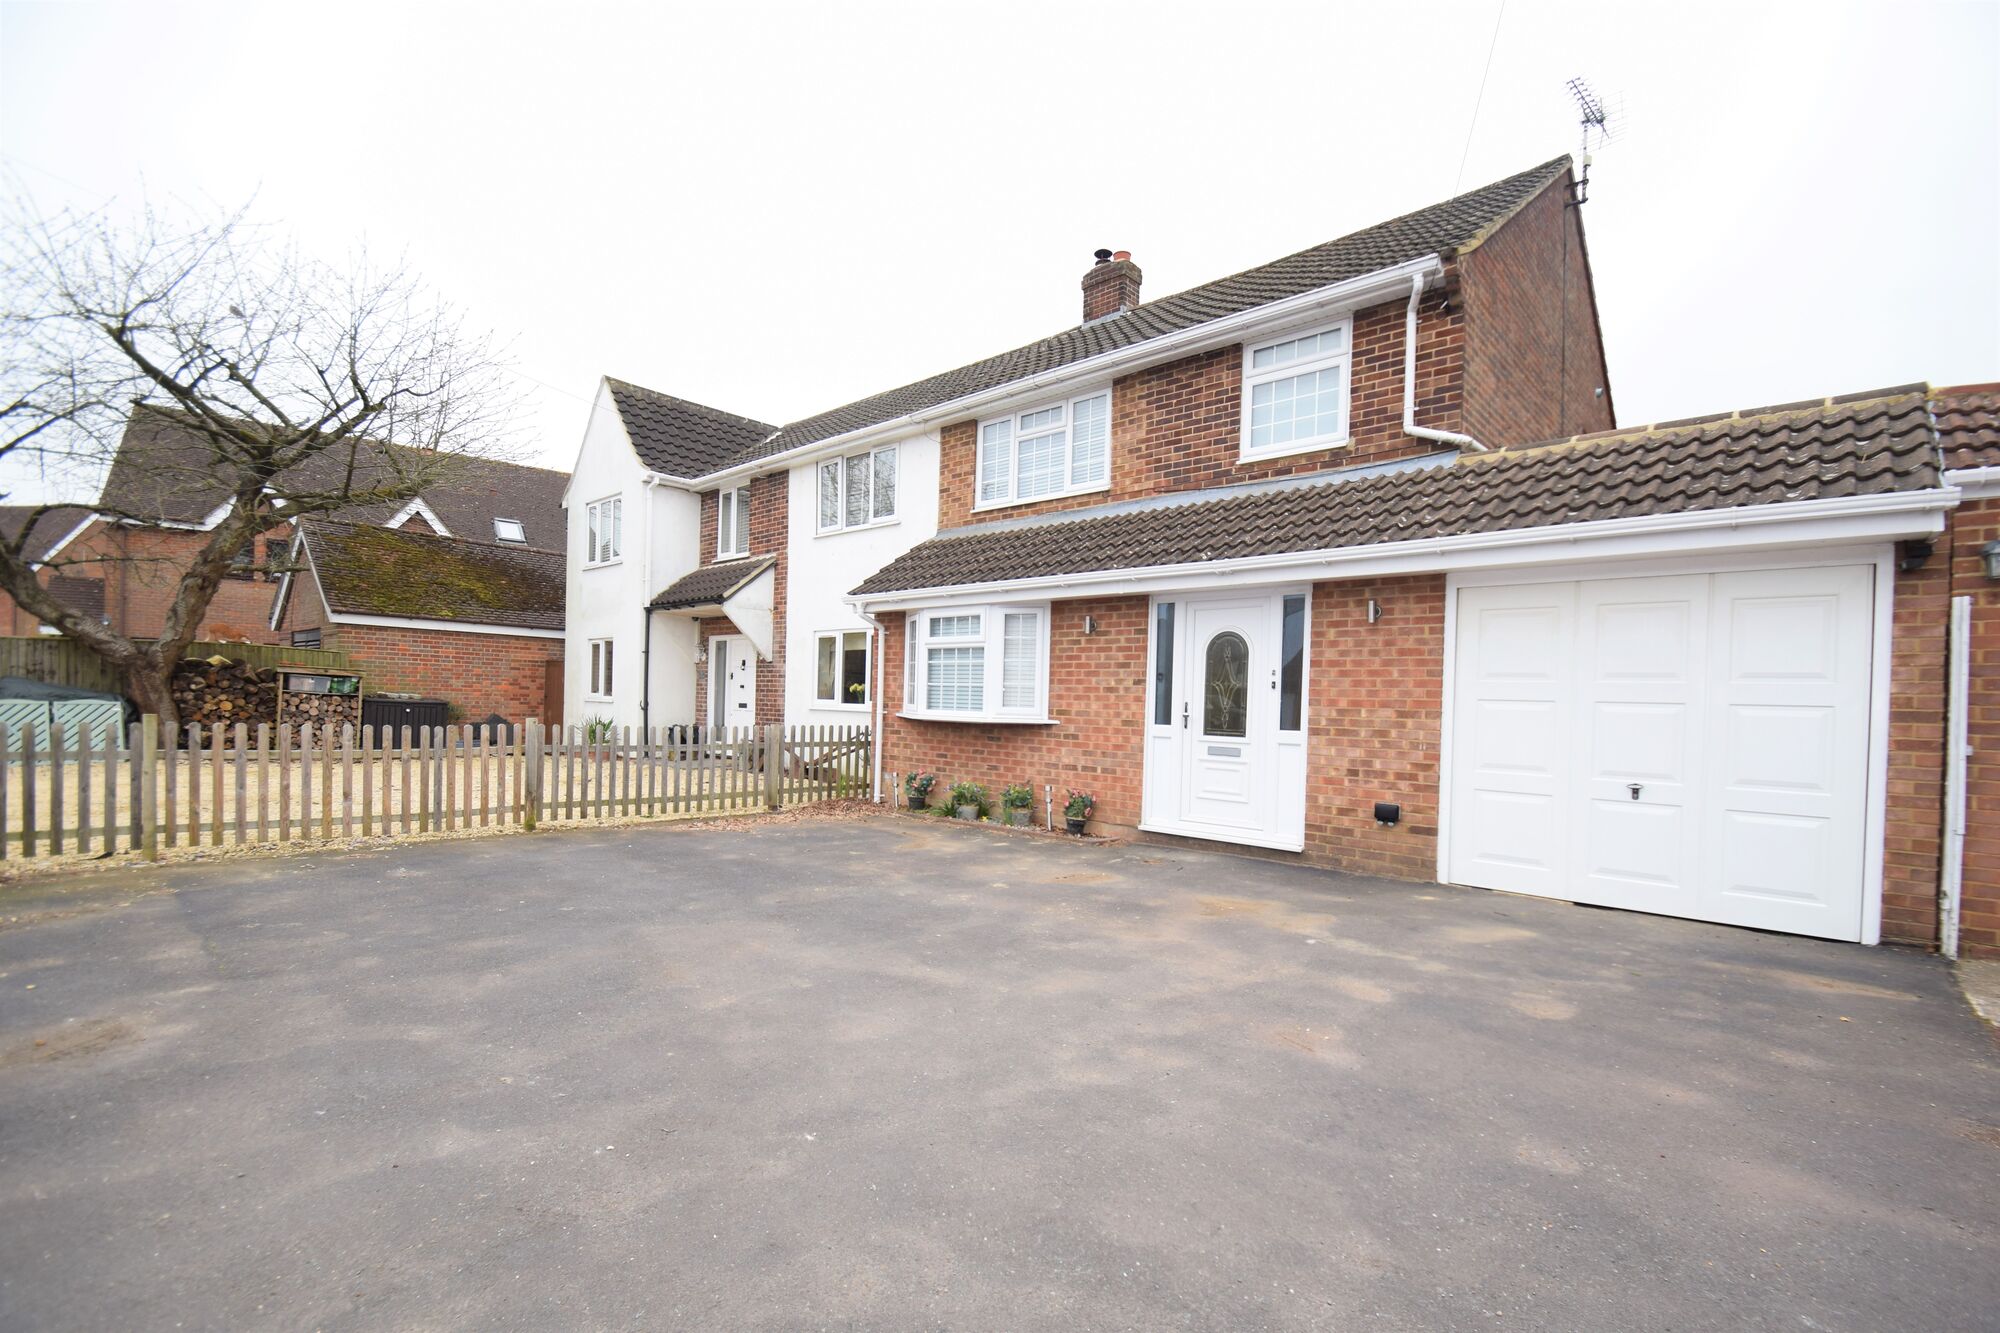 3 bedroom semi detached house to rent, Available from 15/08/2024 Wycombe Road, Prestwood, HP16, main image